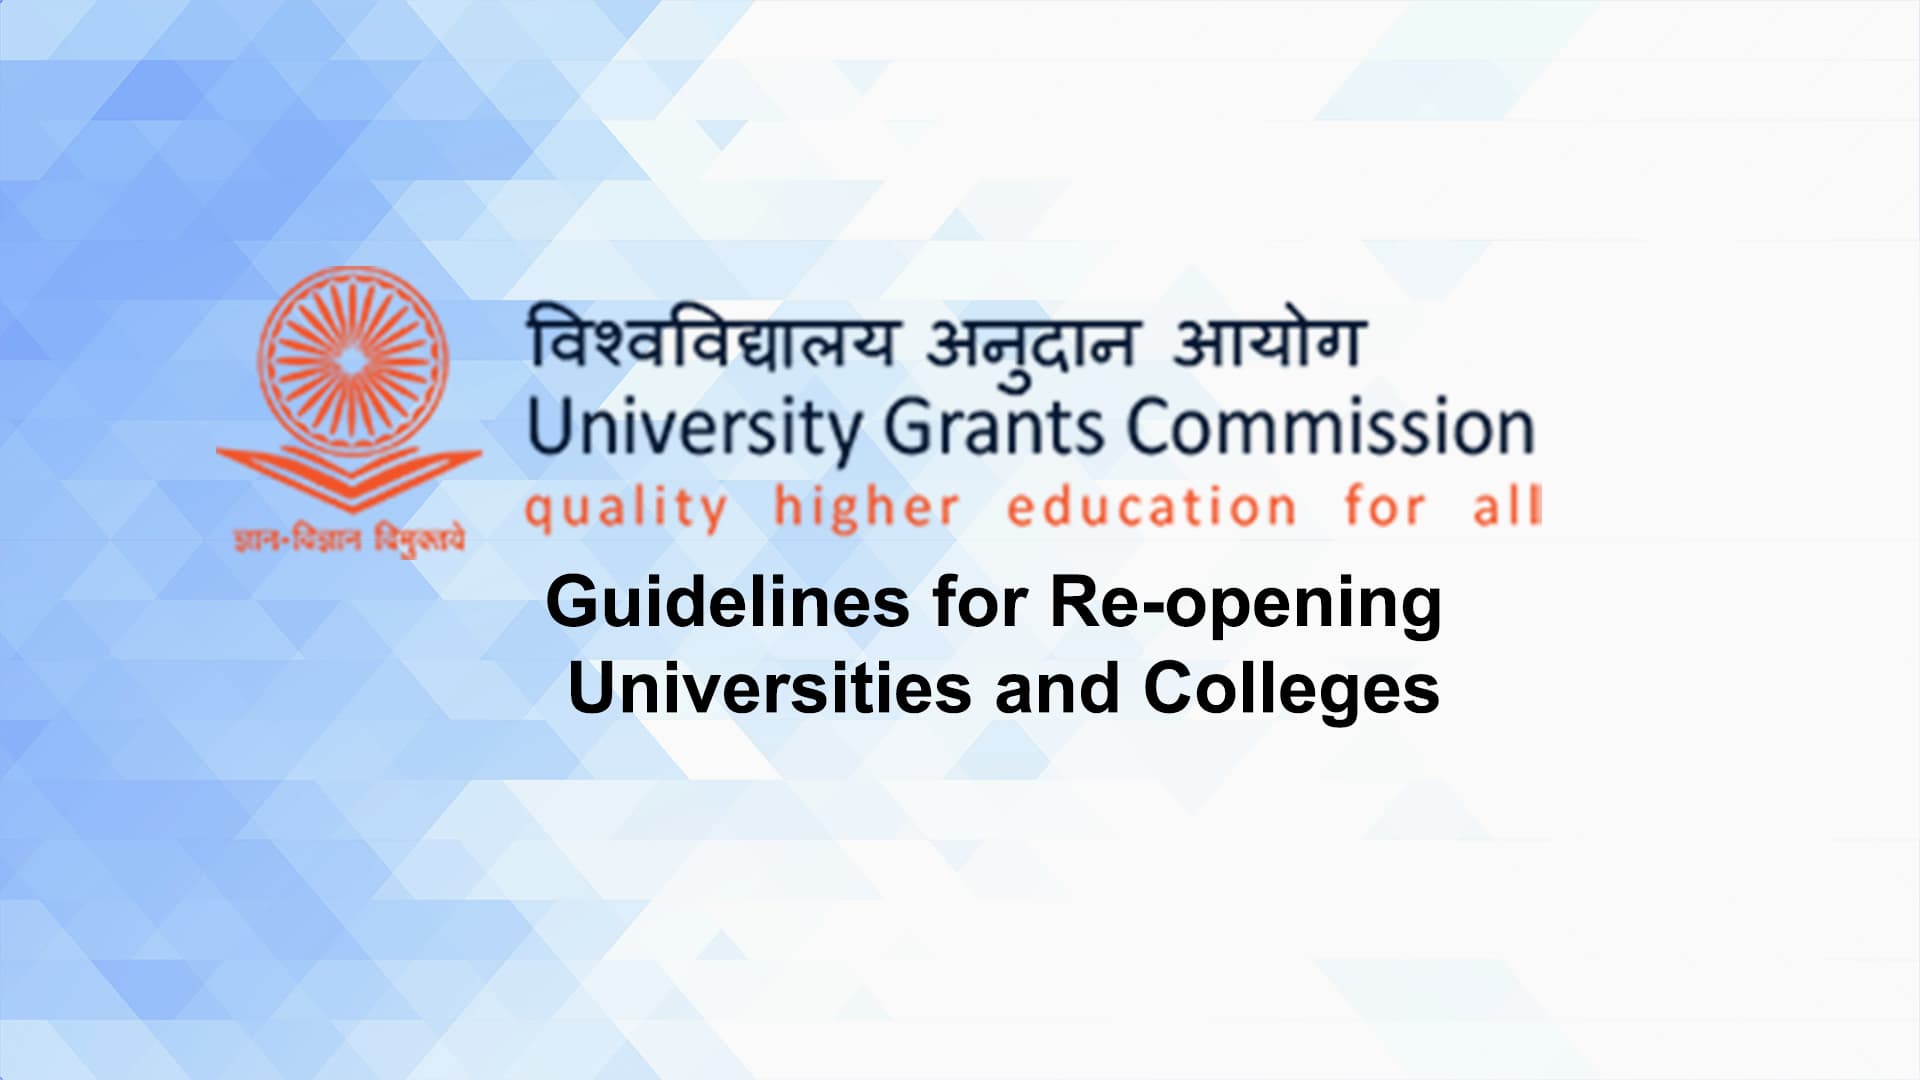 UGC Guidelines for Reopening Universities and Colleges